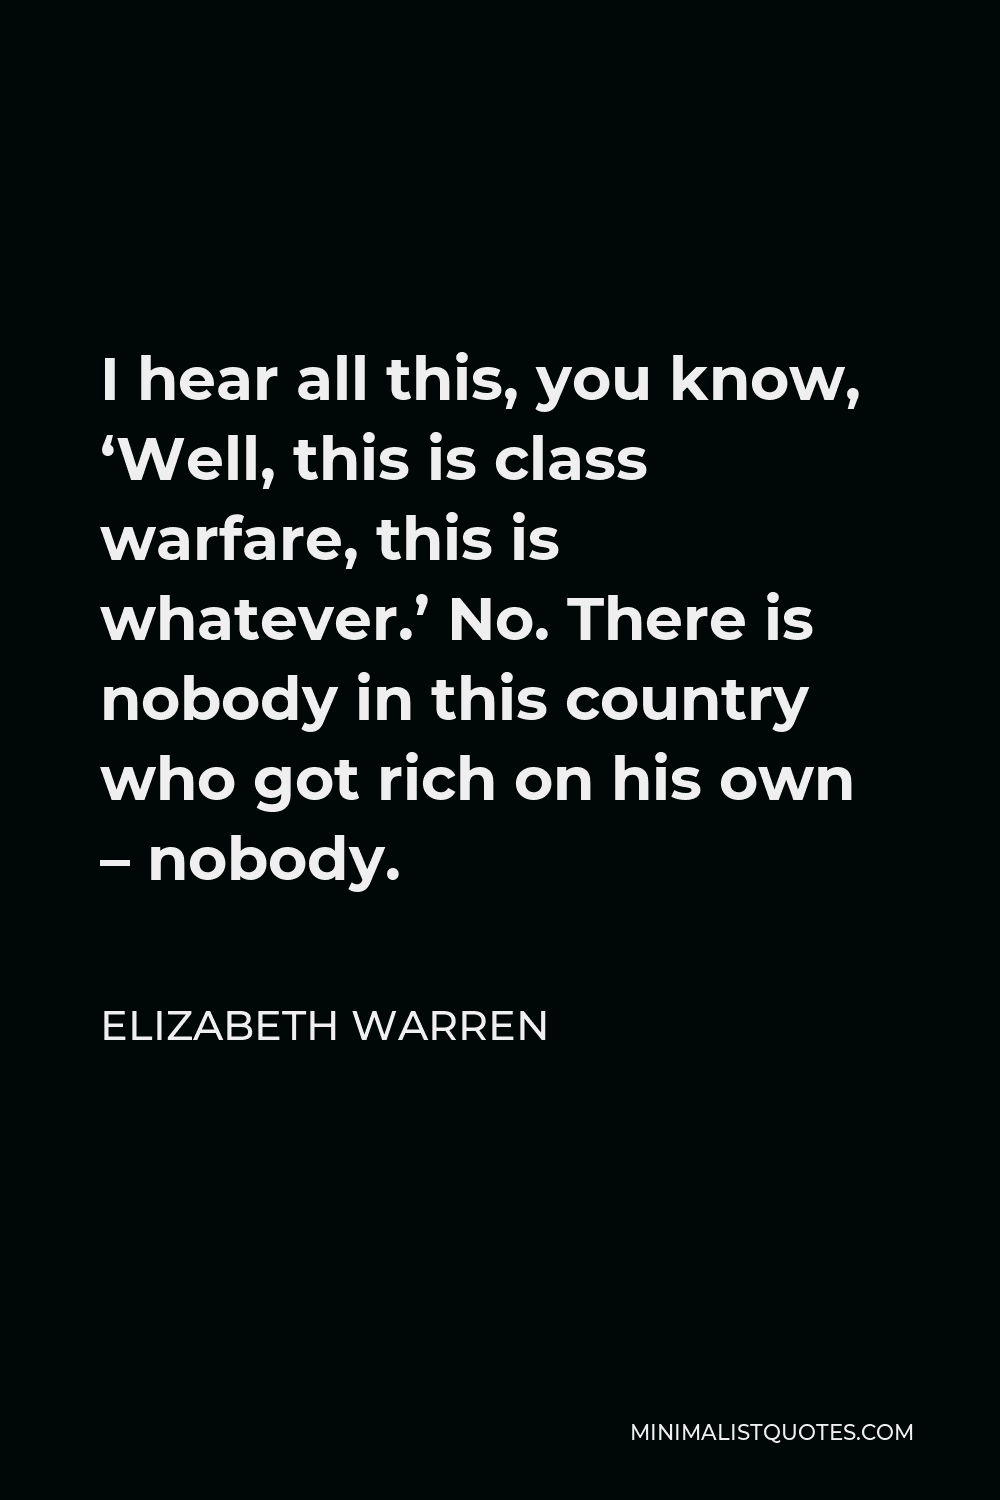 Elizabeth Warren Quote - I hear all this, you know, ‘Well, this is class warfare, this is whatever.’ No. There is nobody in this country who got rich on his own – nobody.